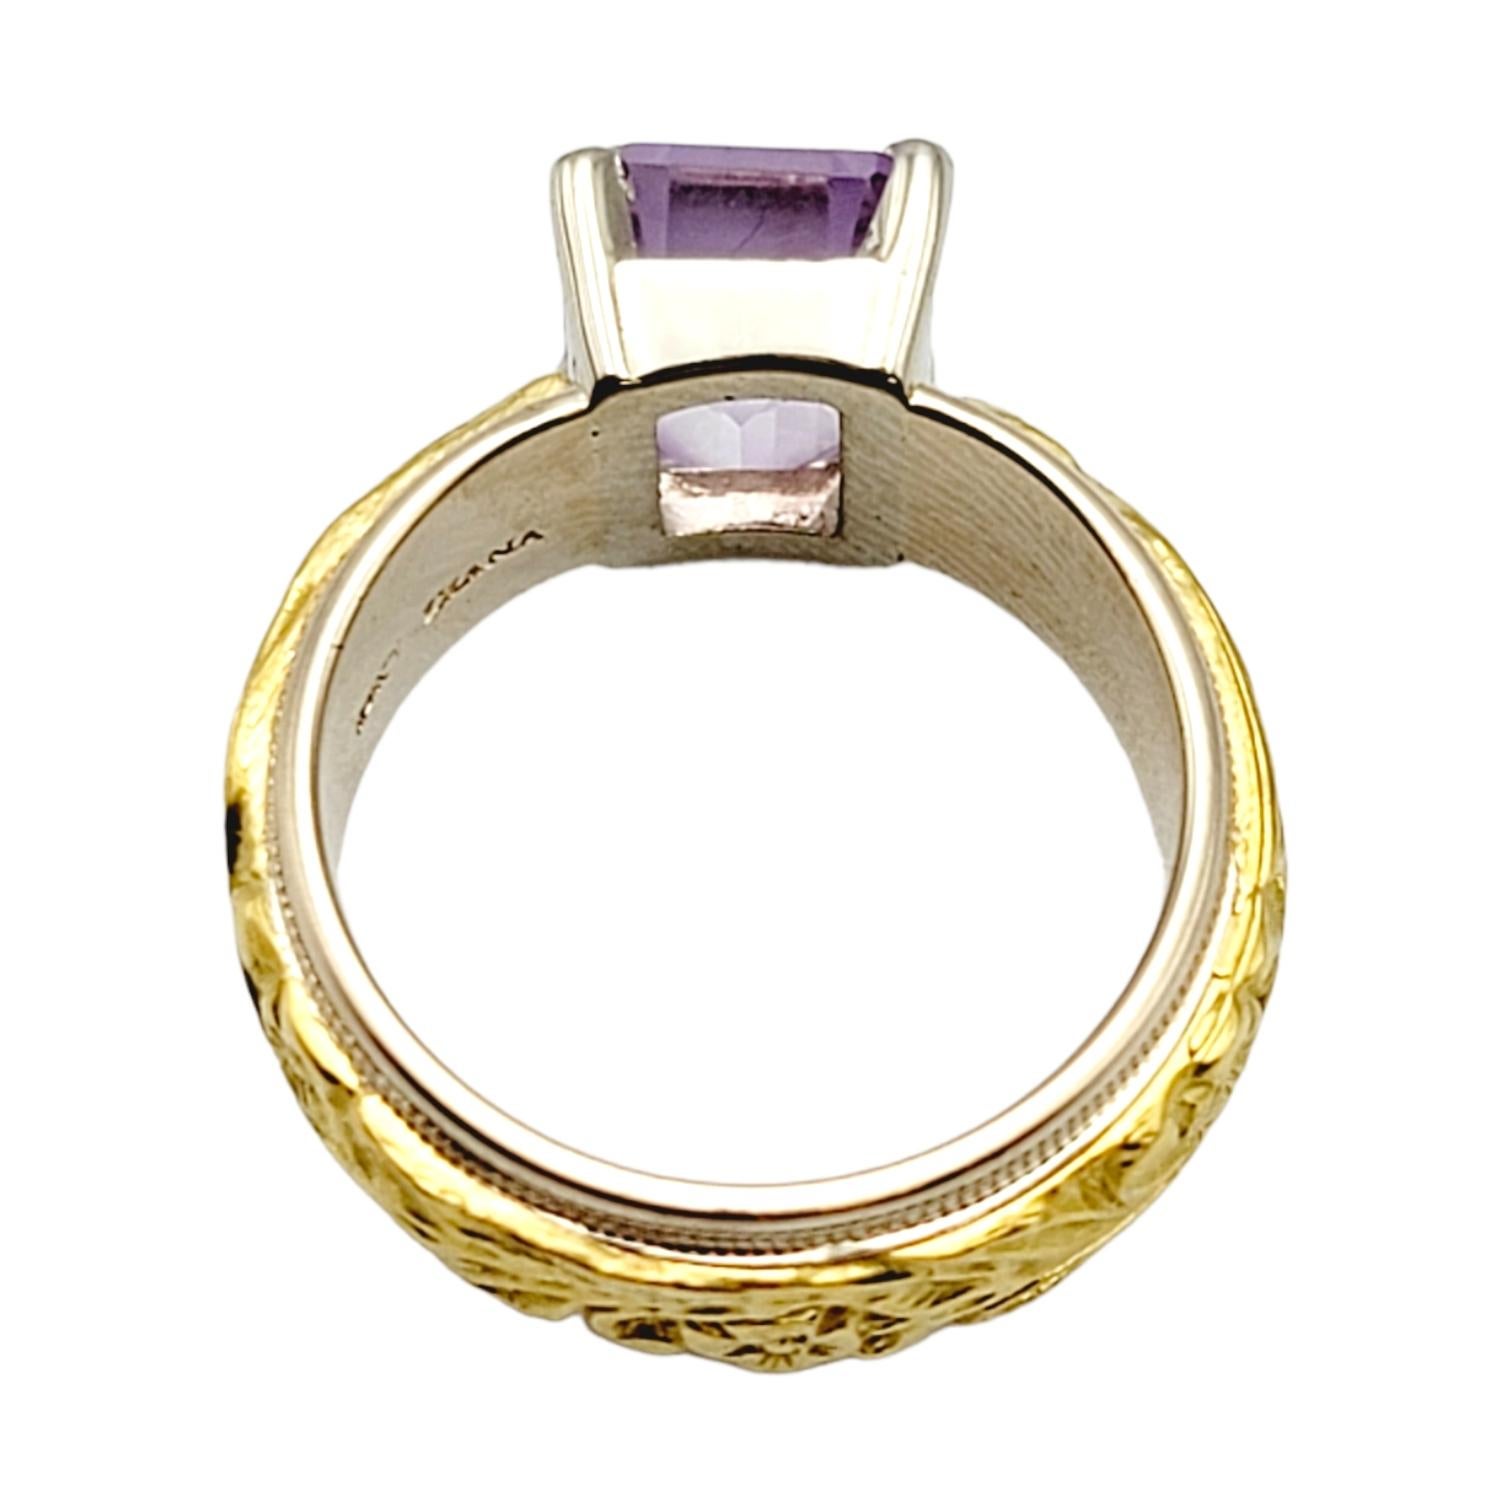 Women's Emerald Cut Amethyst Solitaire Ring with Ornate Engraved Band in 18 Karat Gold For Sale